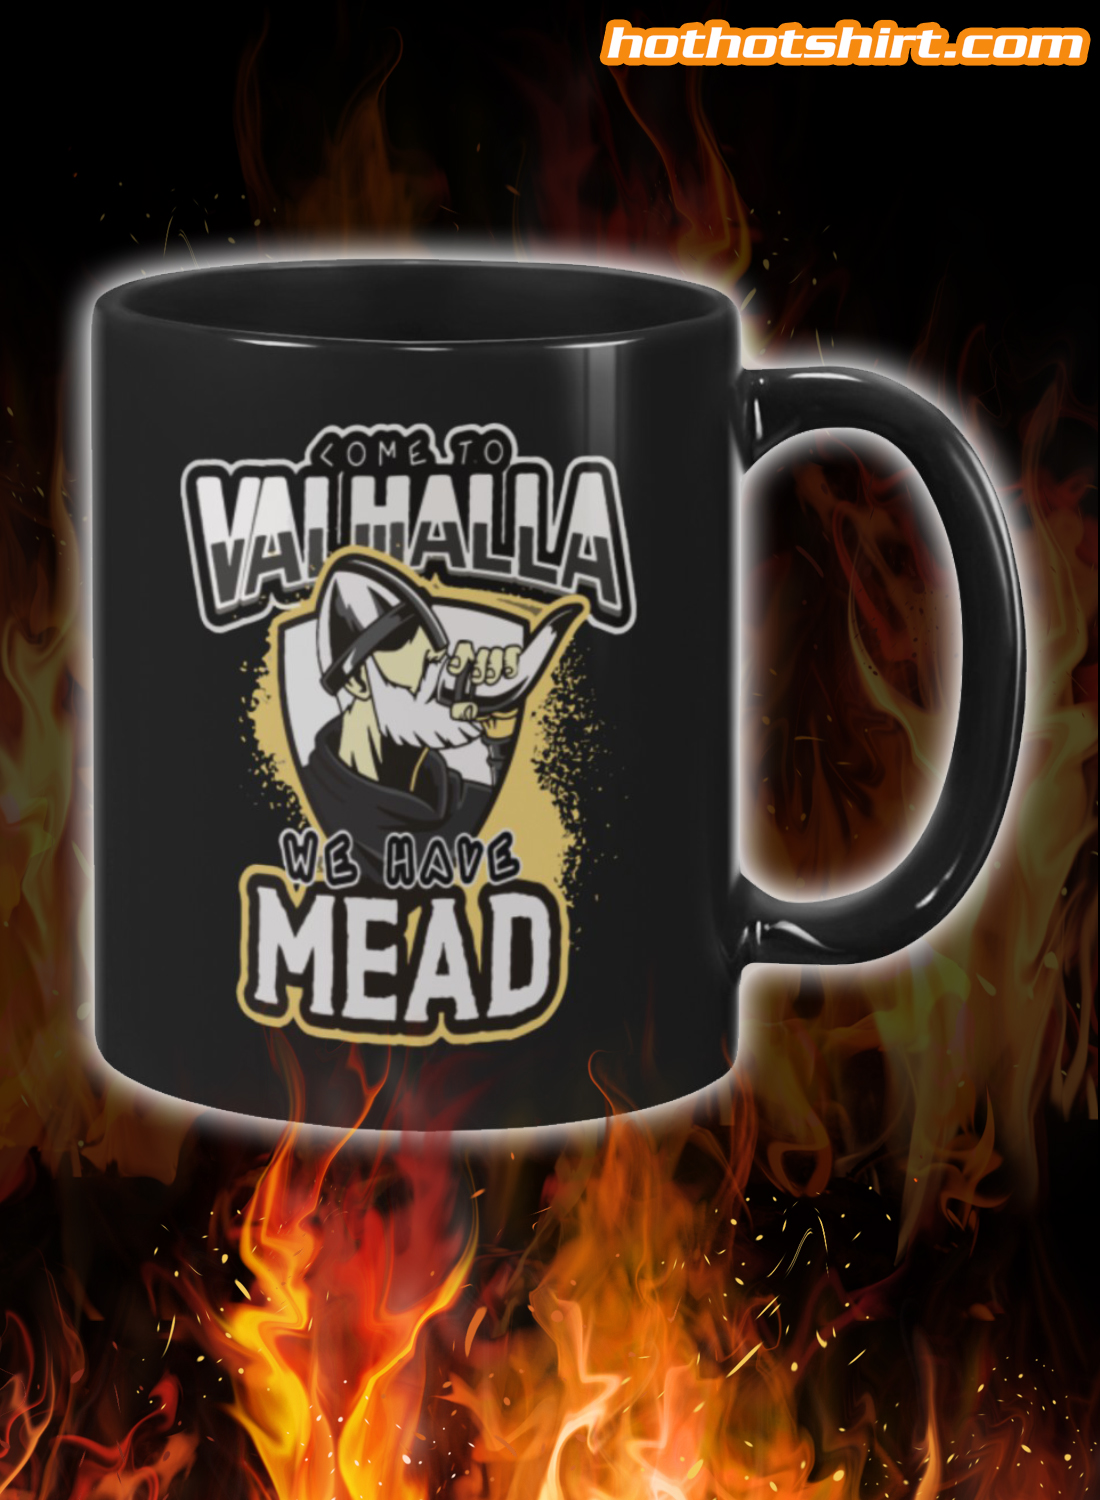 Come to valhalla we have mead mug